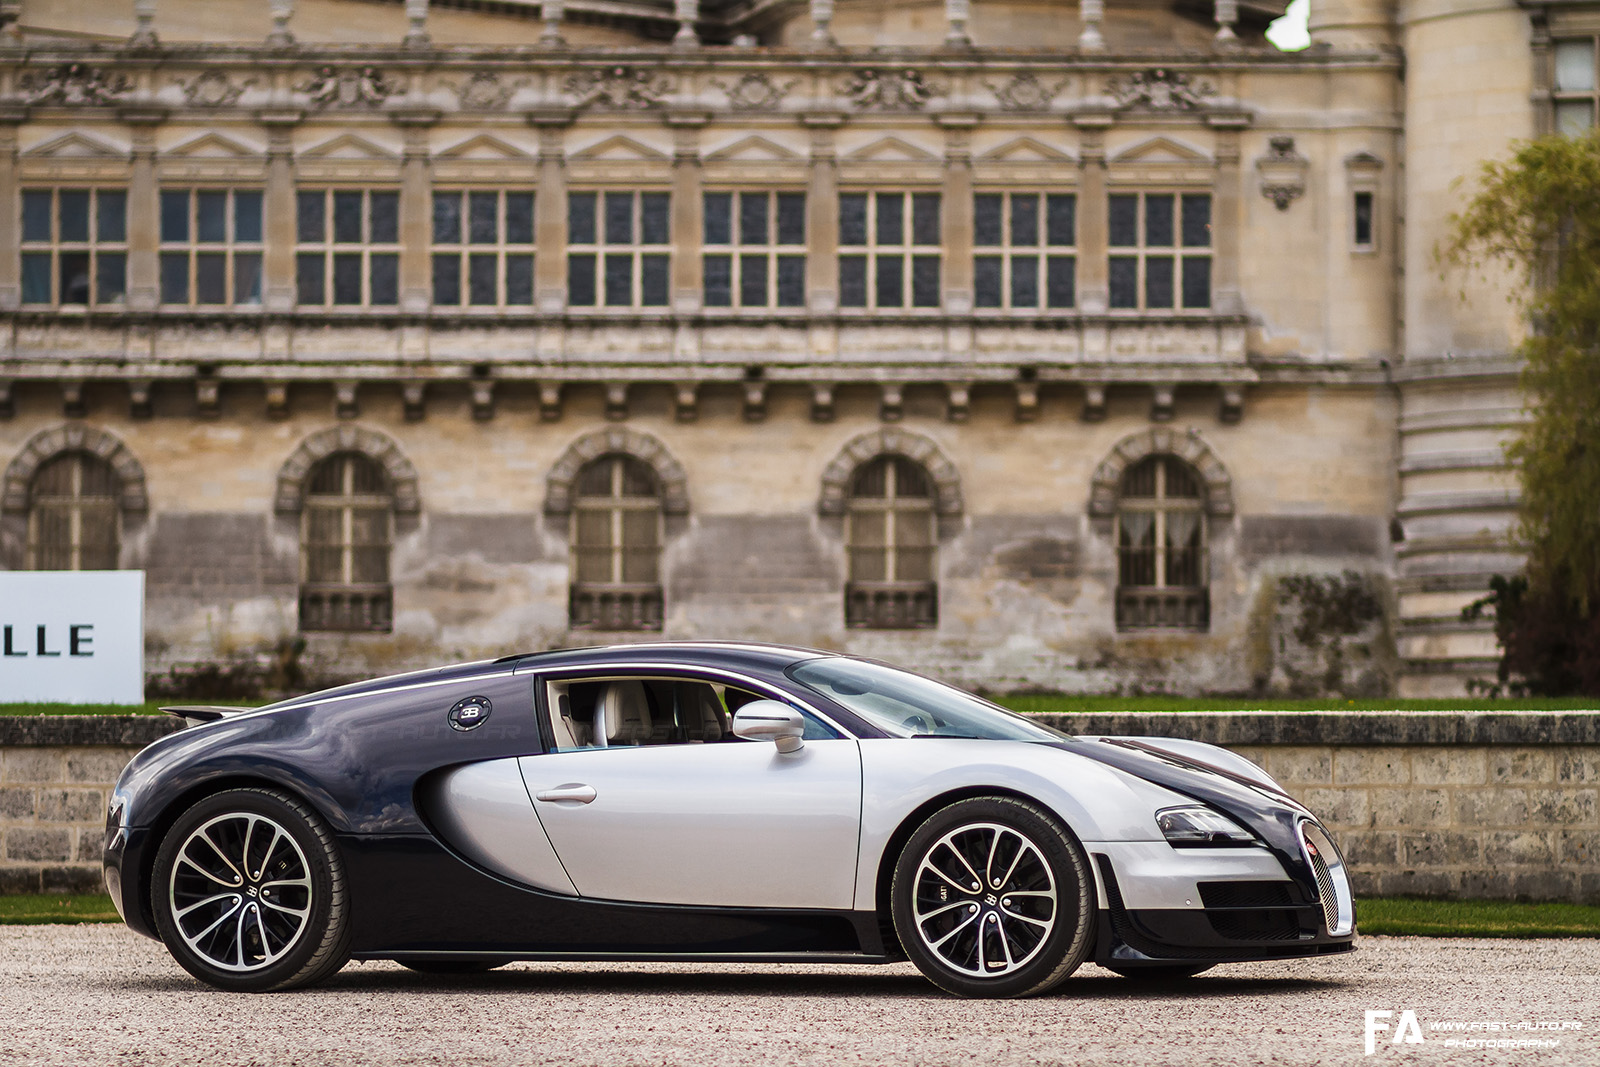 12-shooting-photo-chantilly-concours-veyron-supersport.jpg